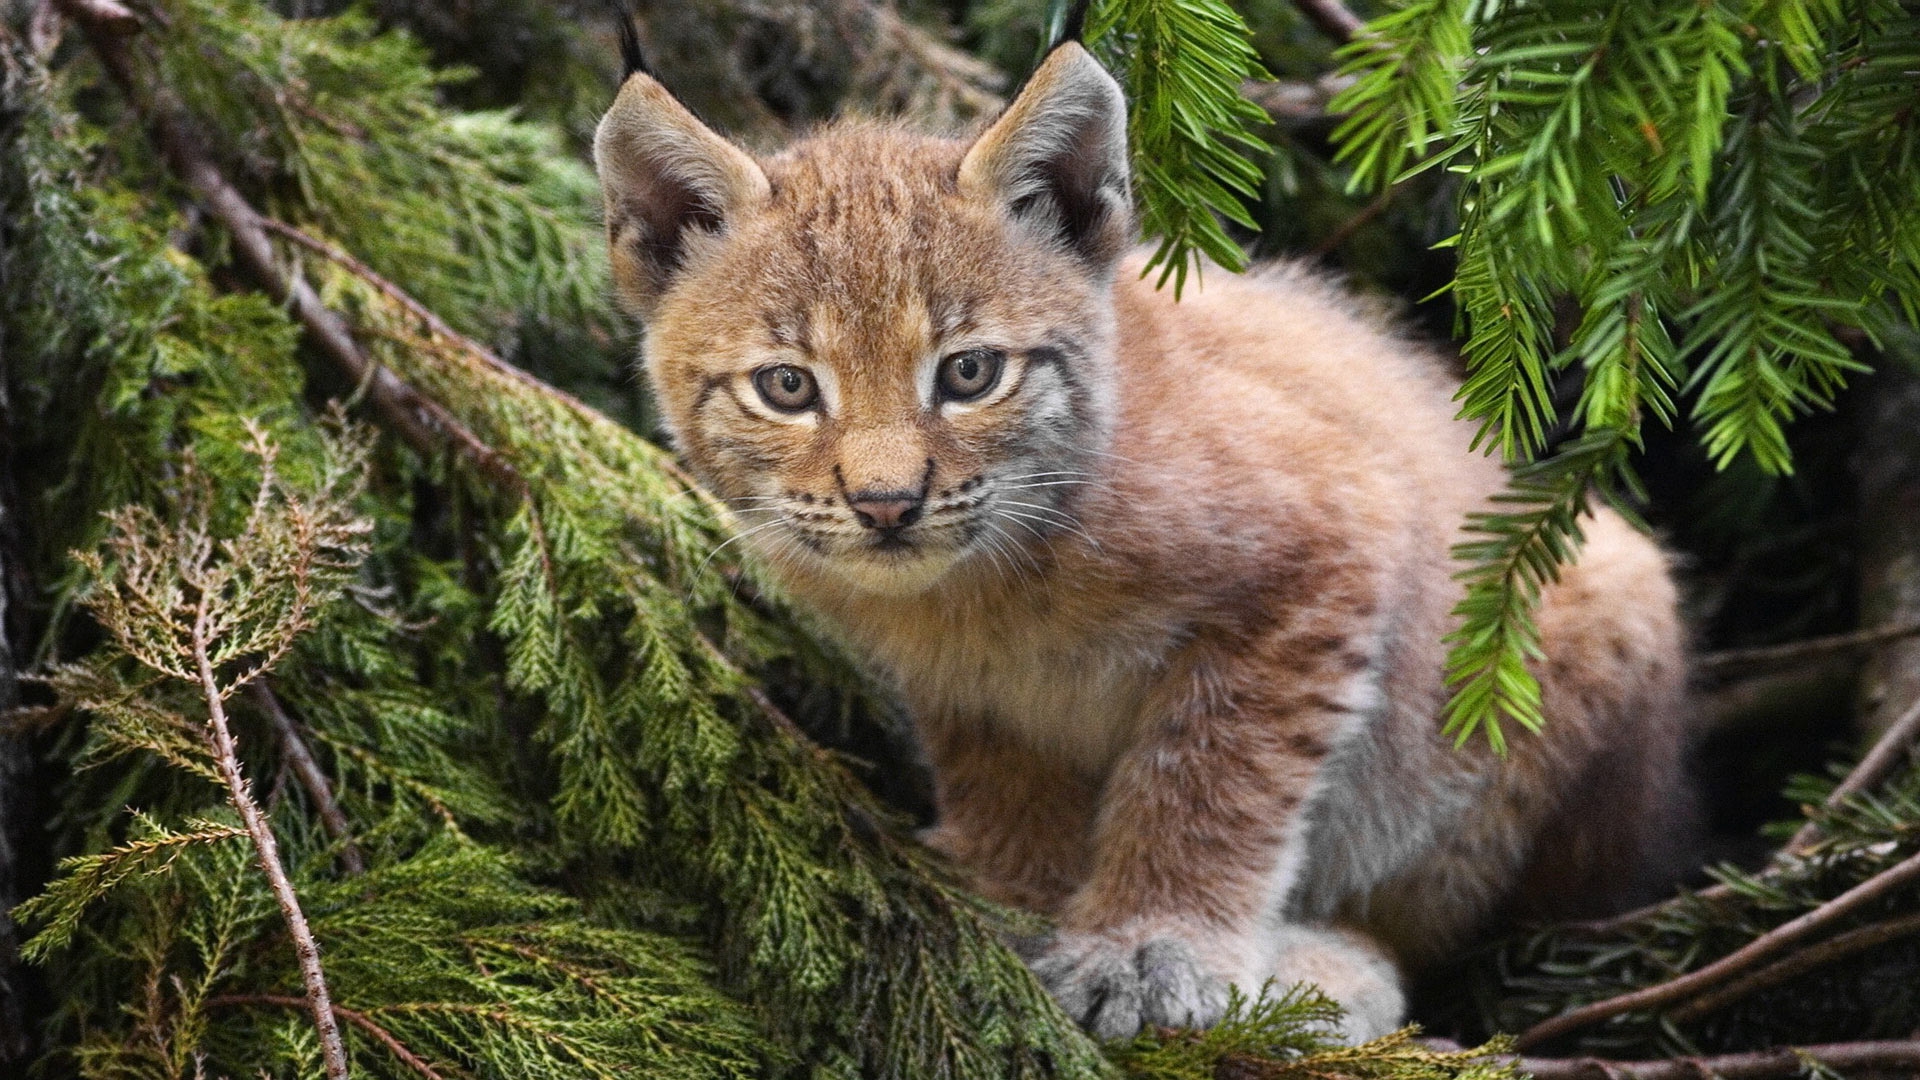 A picture of a bobcat kitten in pine branches